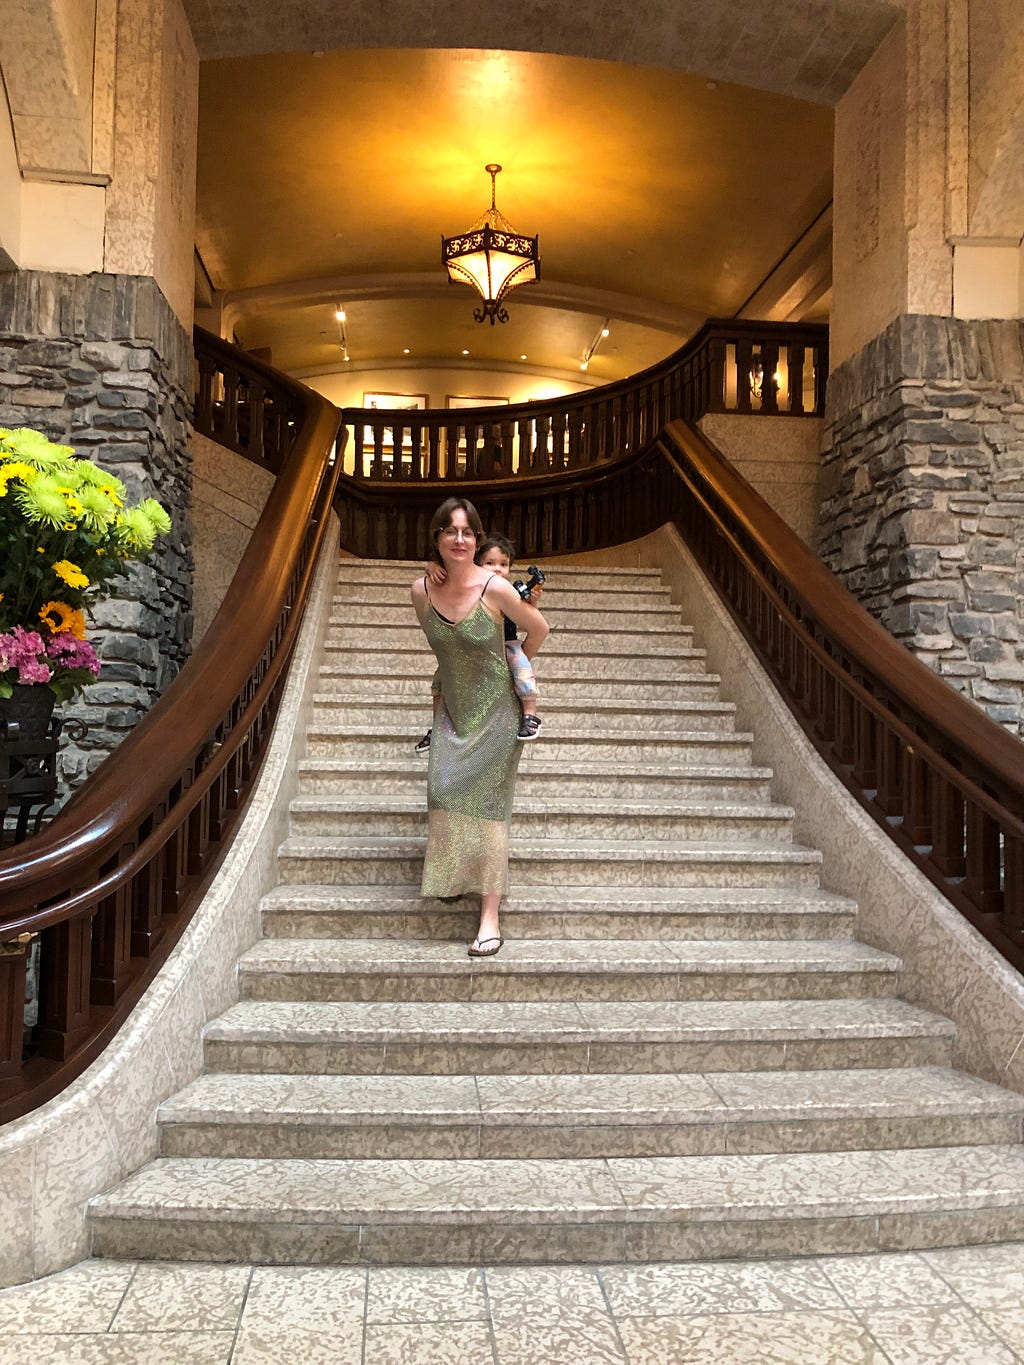 The author walking down some elegant stairs dressed in a sparkling sheath dress carrying a small child piggyback